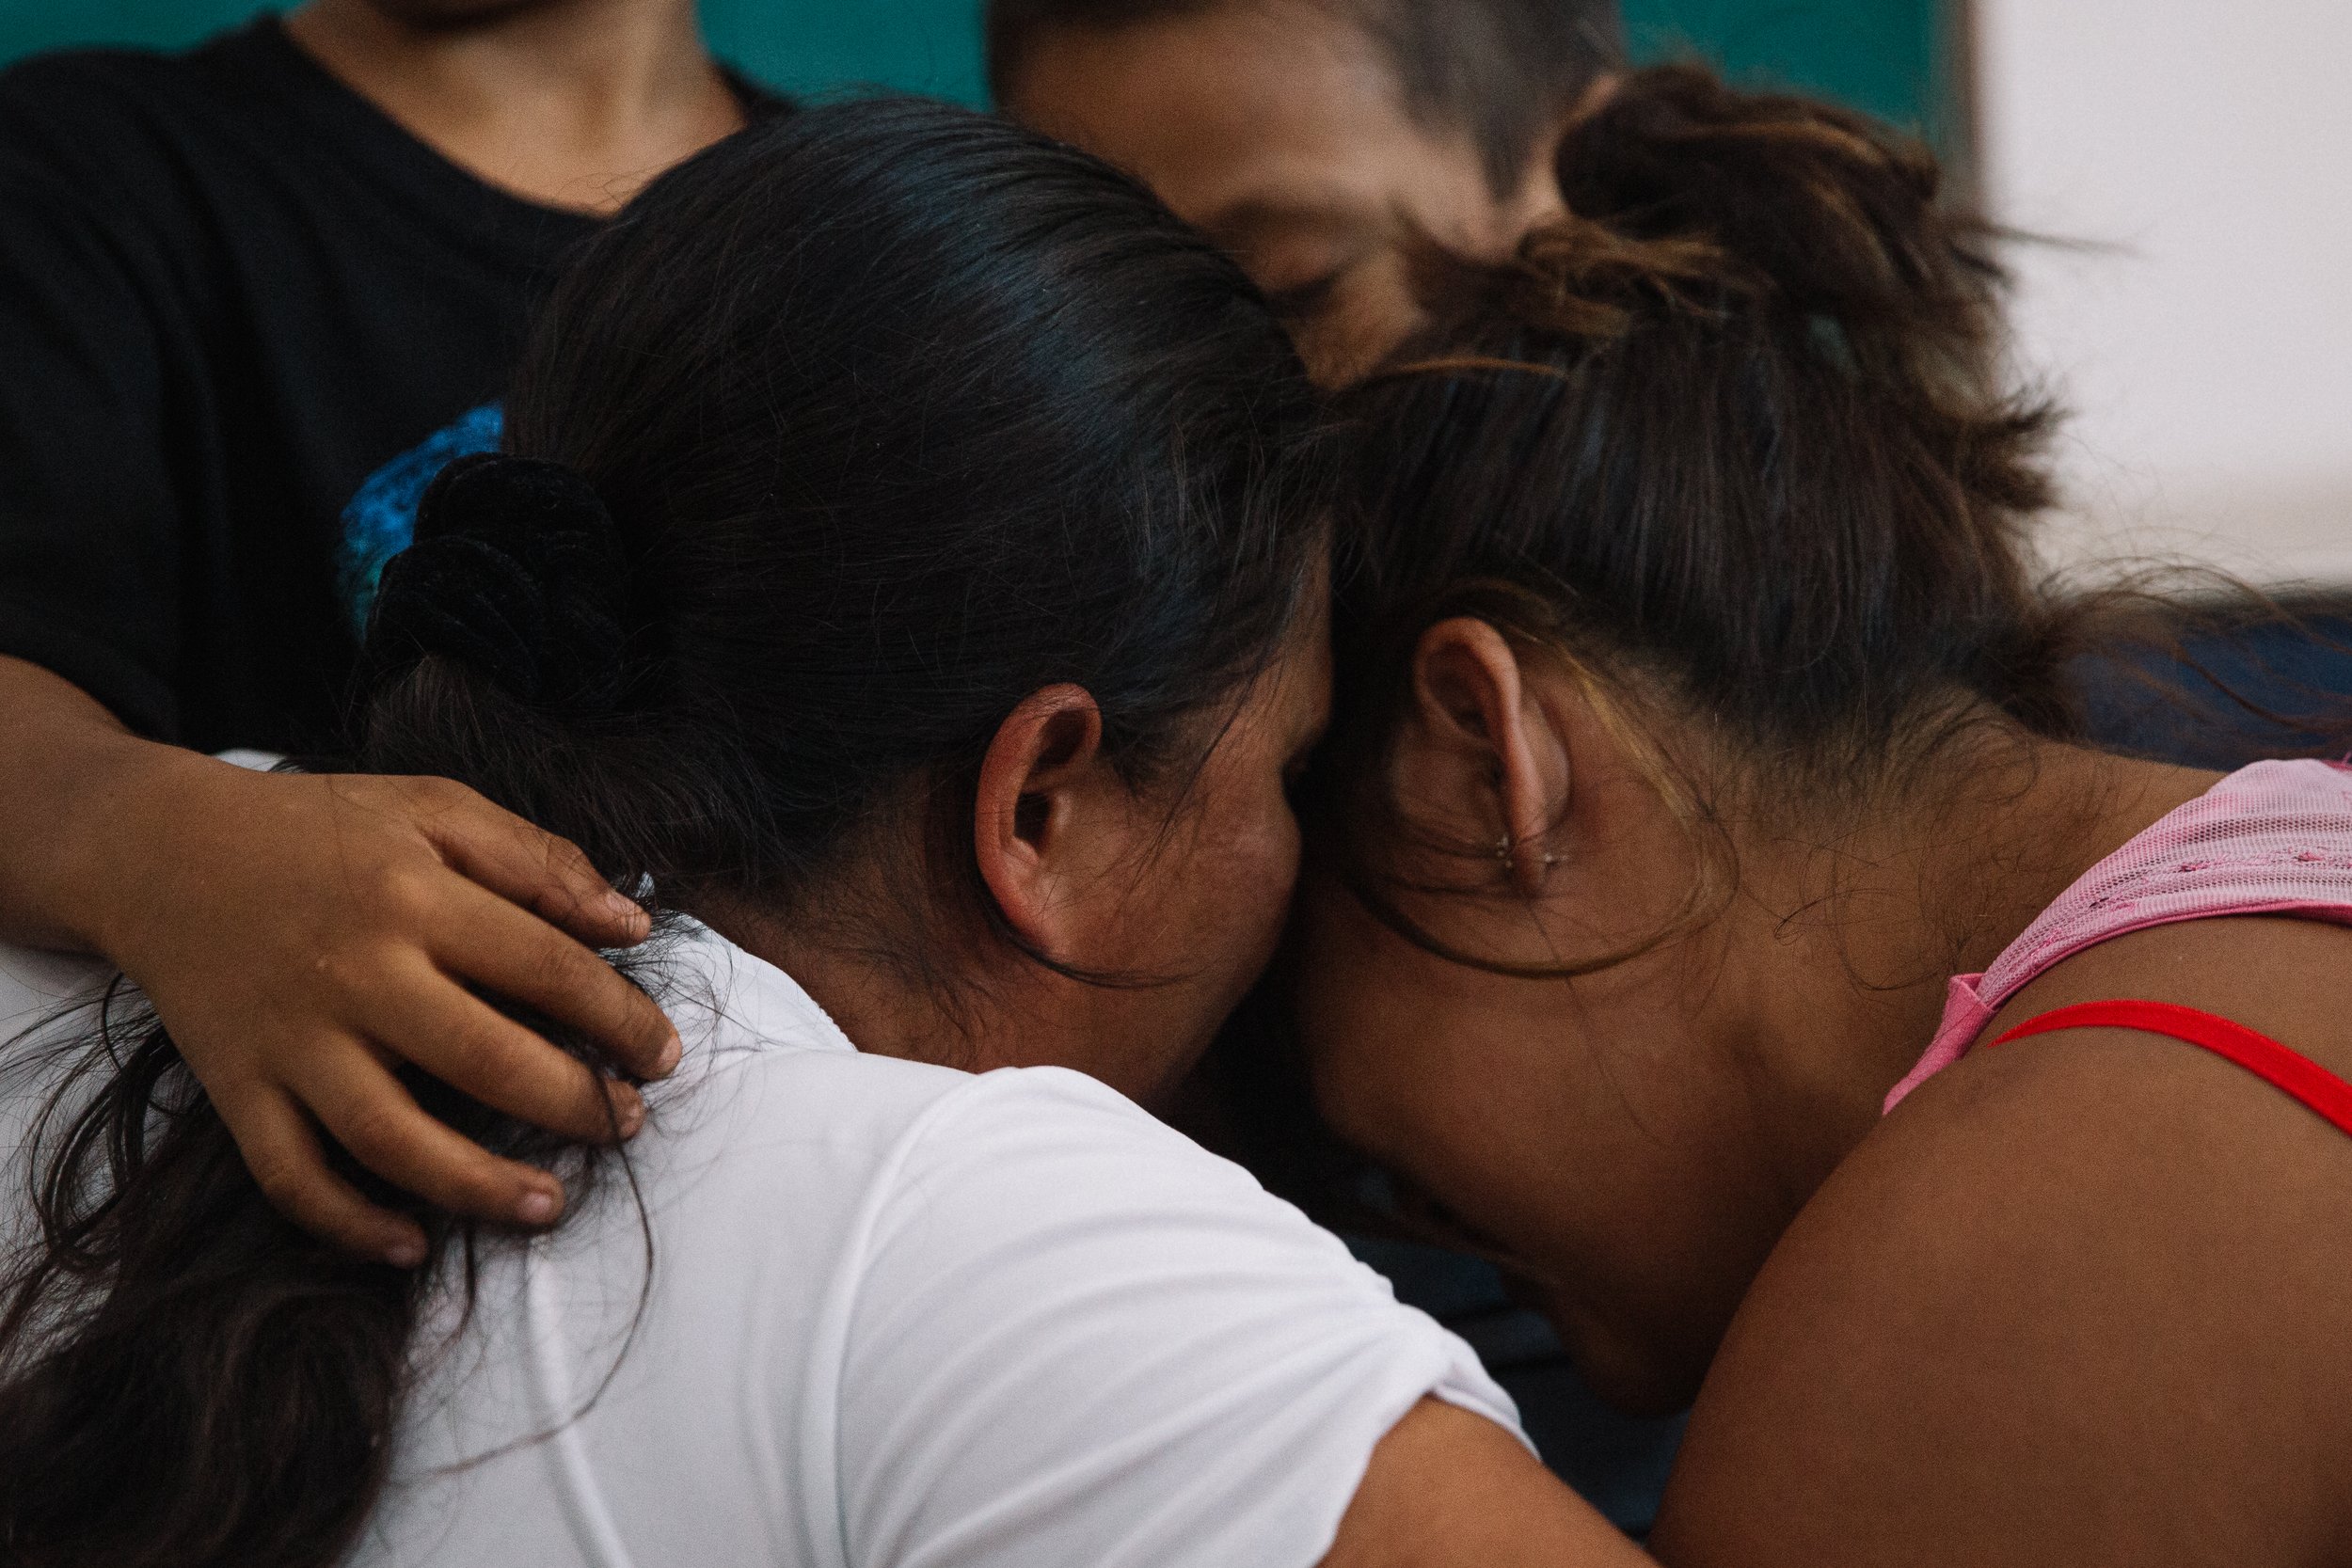  A Mother's Love Reunited: Reyna Edubinia Amaya embraces her daughter Juana and two grandchildren inside a church in Huixtla, Chiapas, Mexico, after eight long years of separation. The emotional reunion is a testament to the power of love and the unb